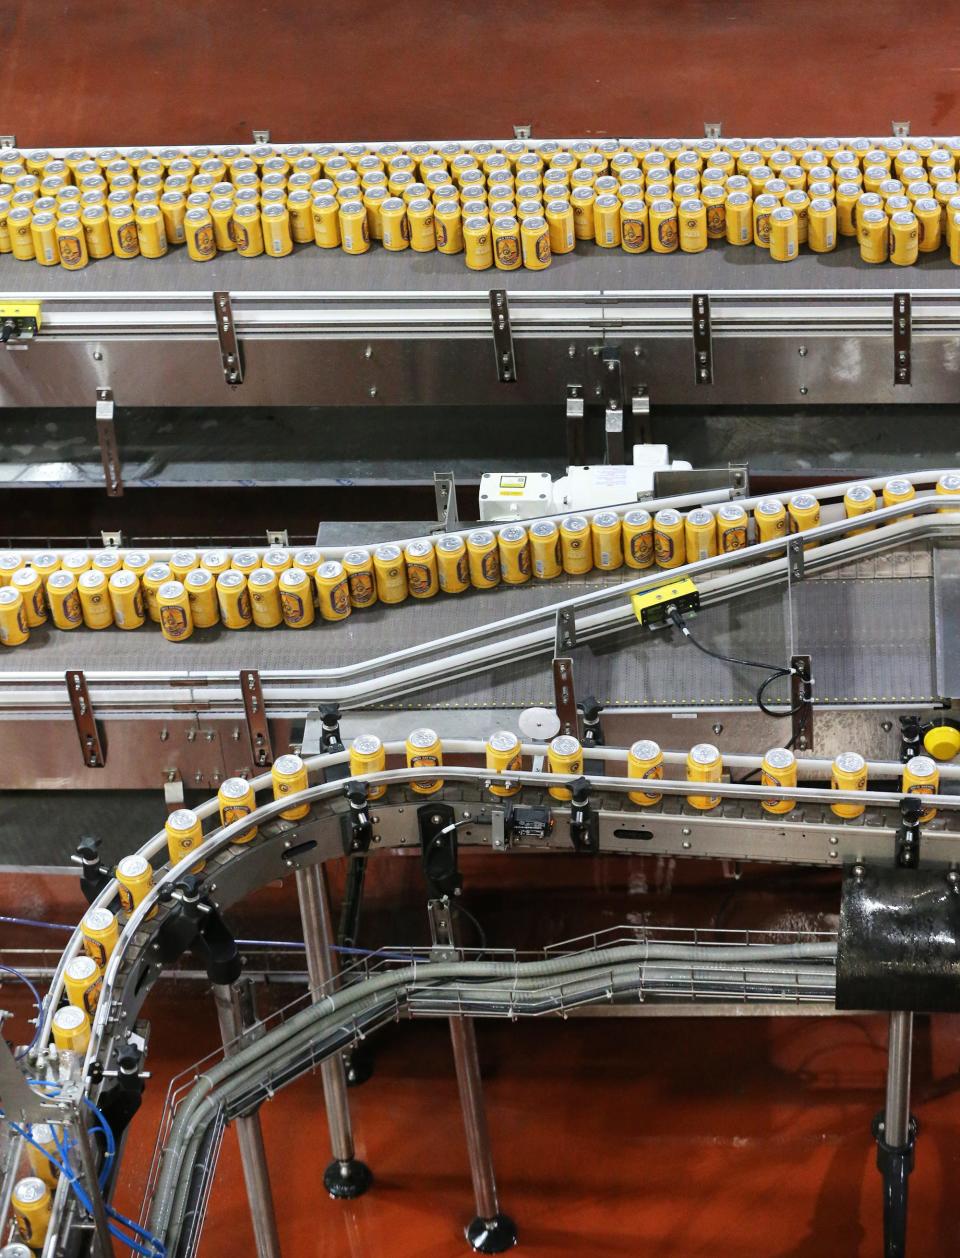 Anheuser-Busch's new $6 million canning line at Cisco Brewers in Portsmouth, seen Friday, Feb. 17, 2023, can produce 625 cases of beer per hour, according to the company.